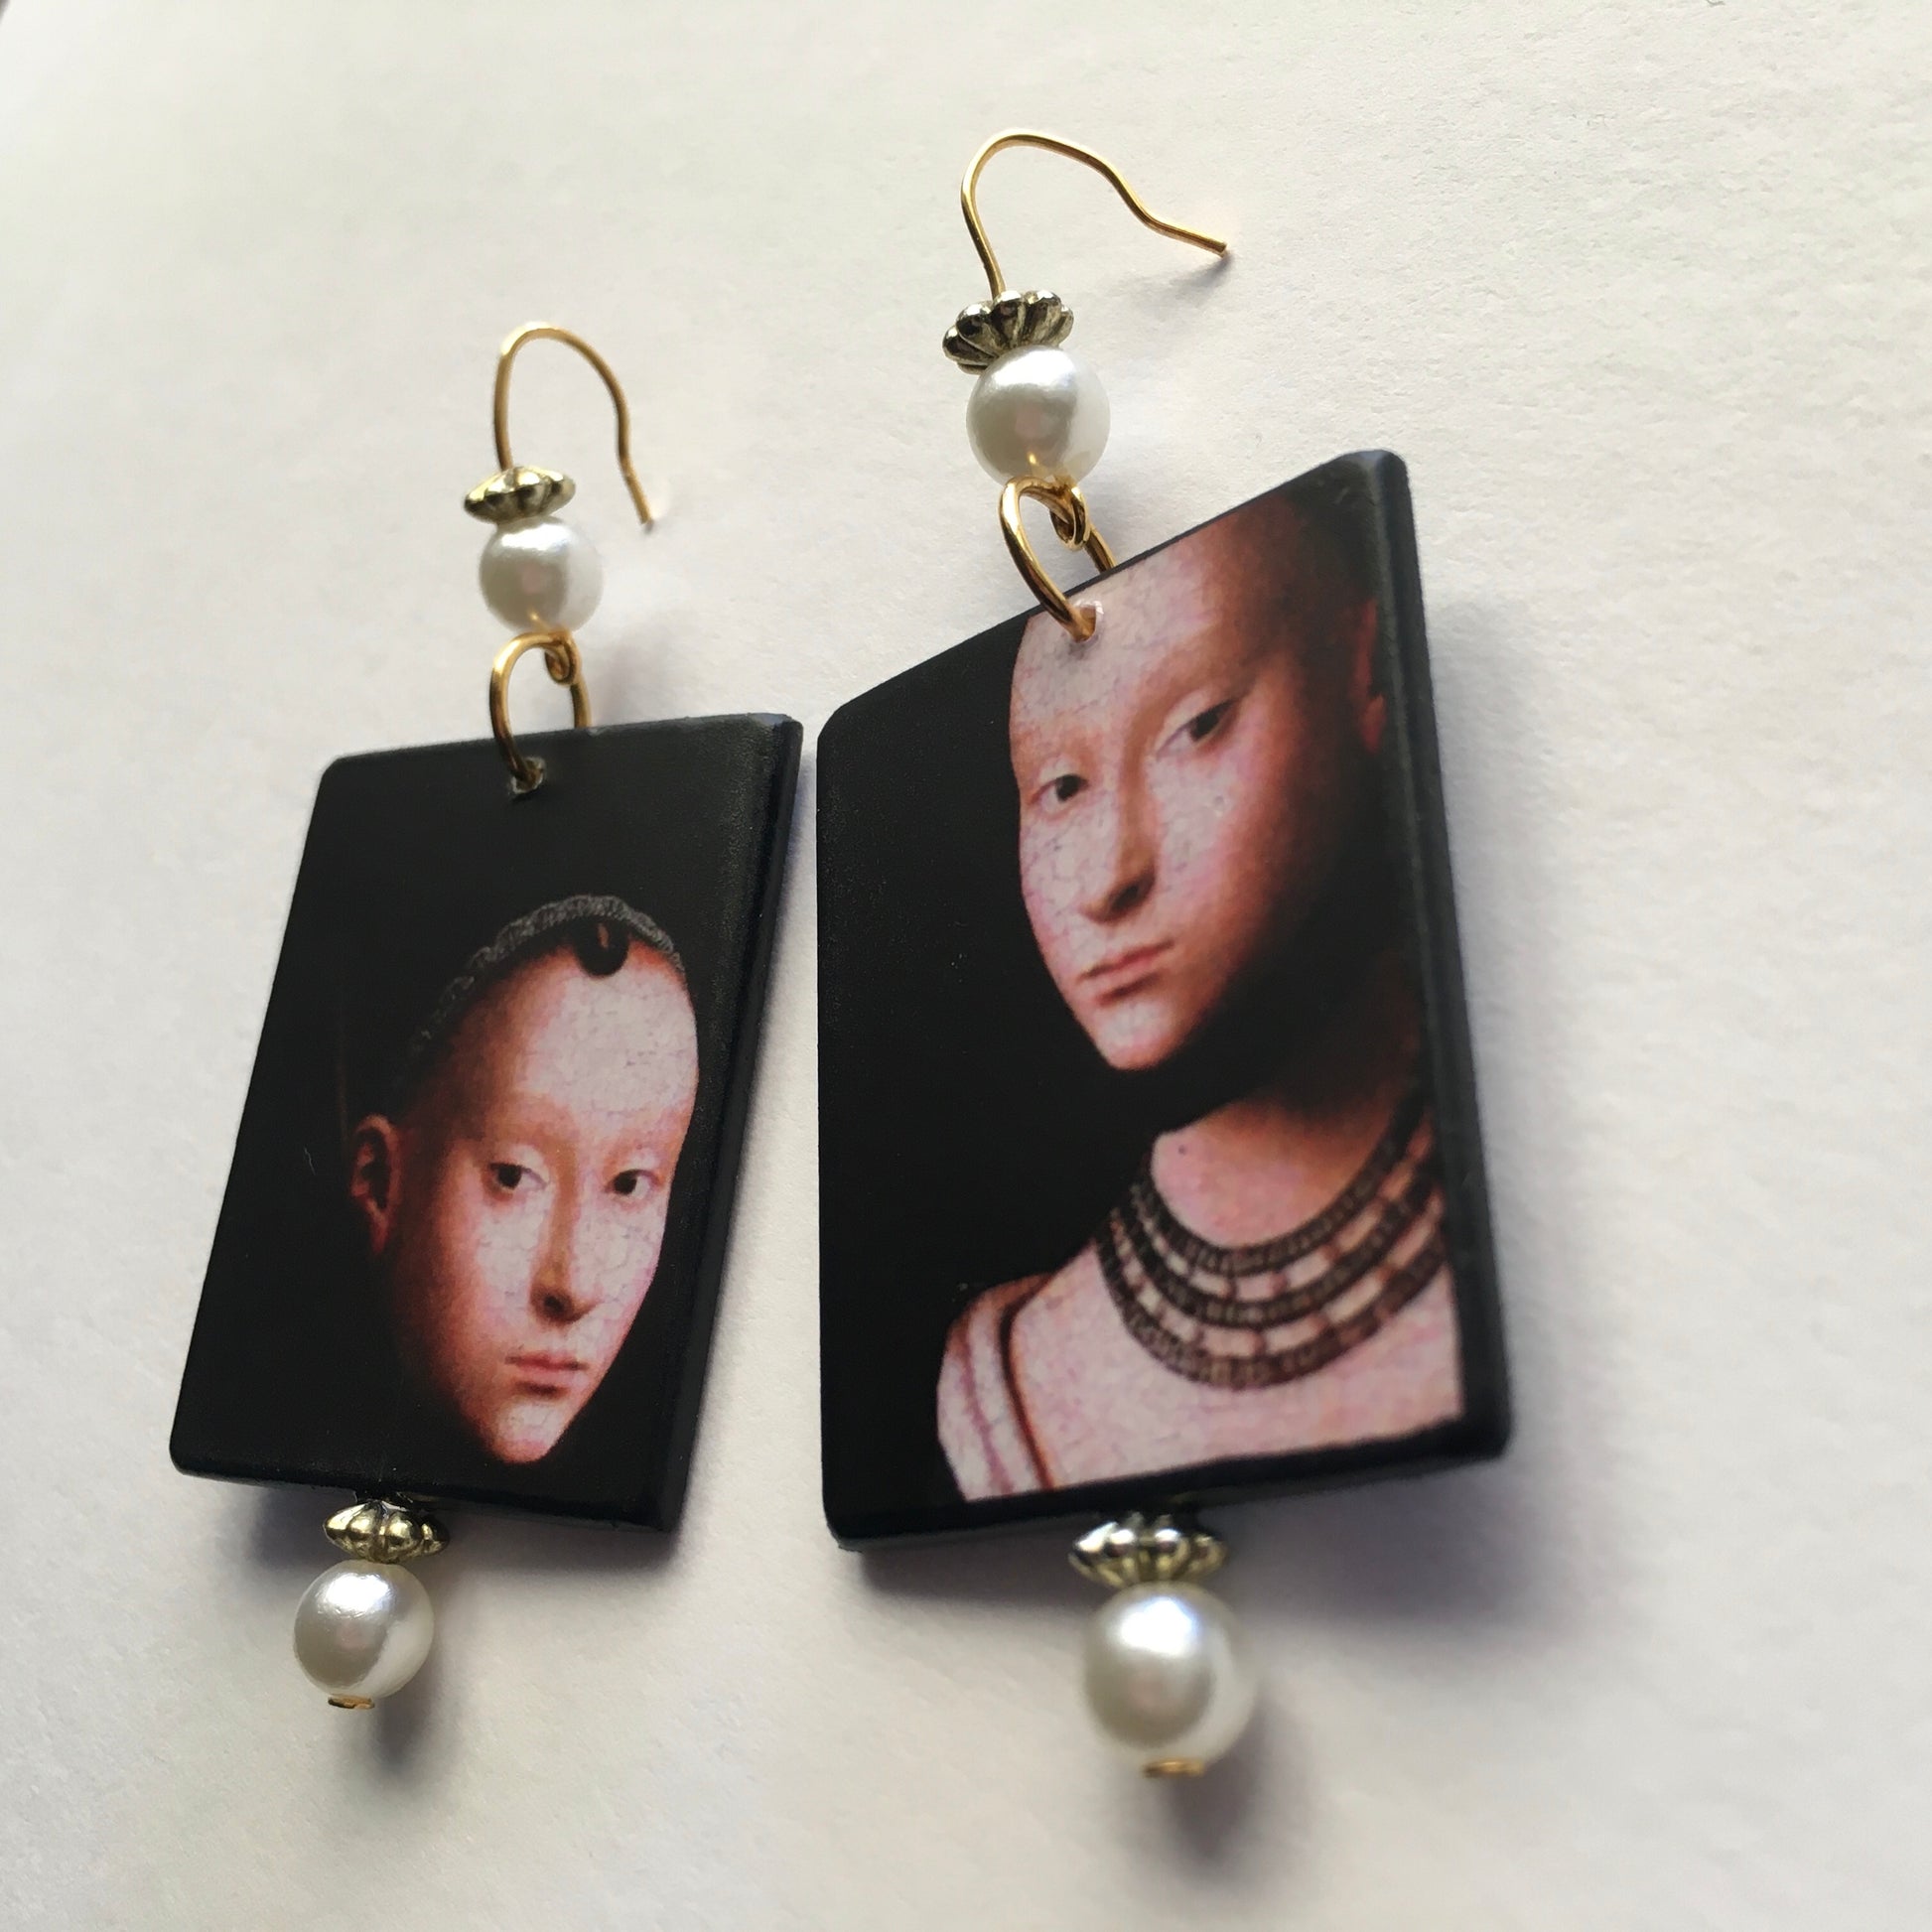 Petrus Christus art earrings handmade from sustainable wood with pearls. Renaissance portrait detail.